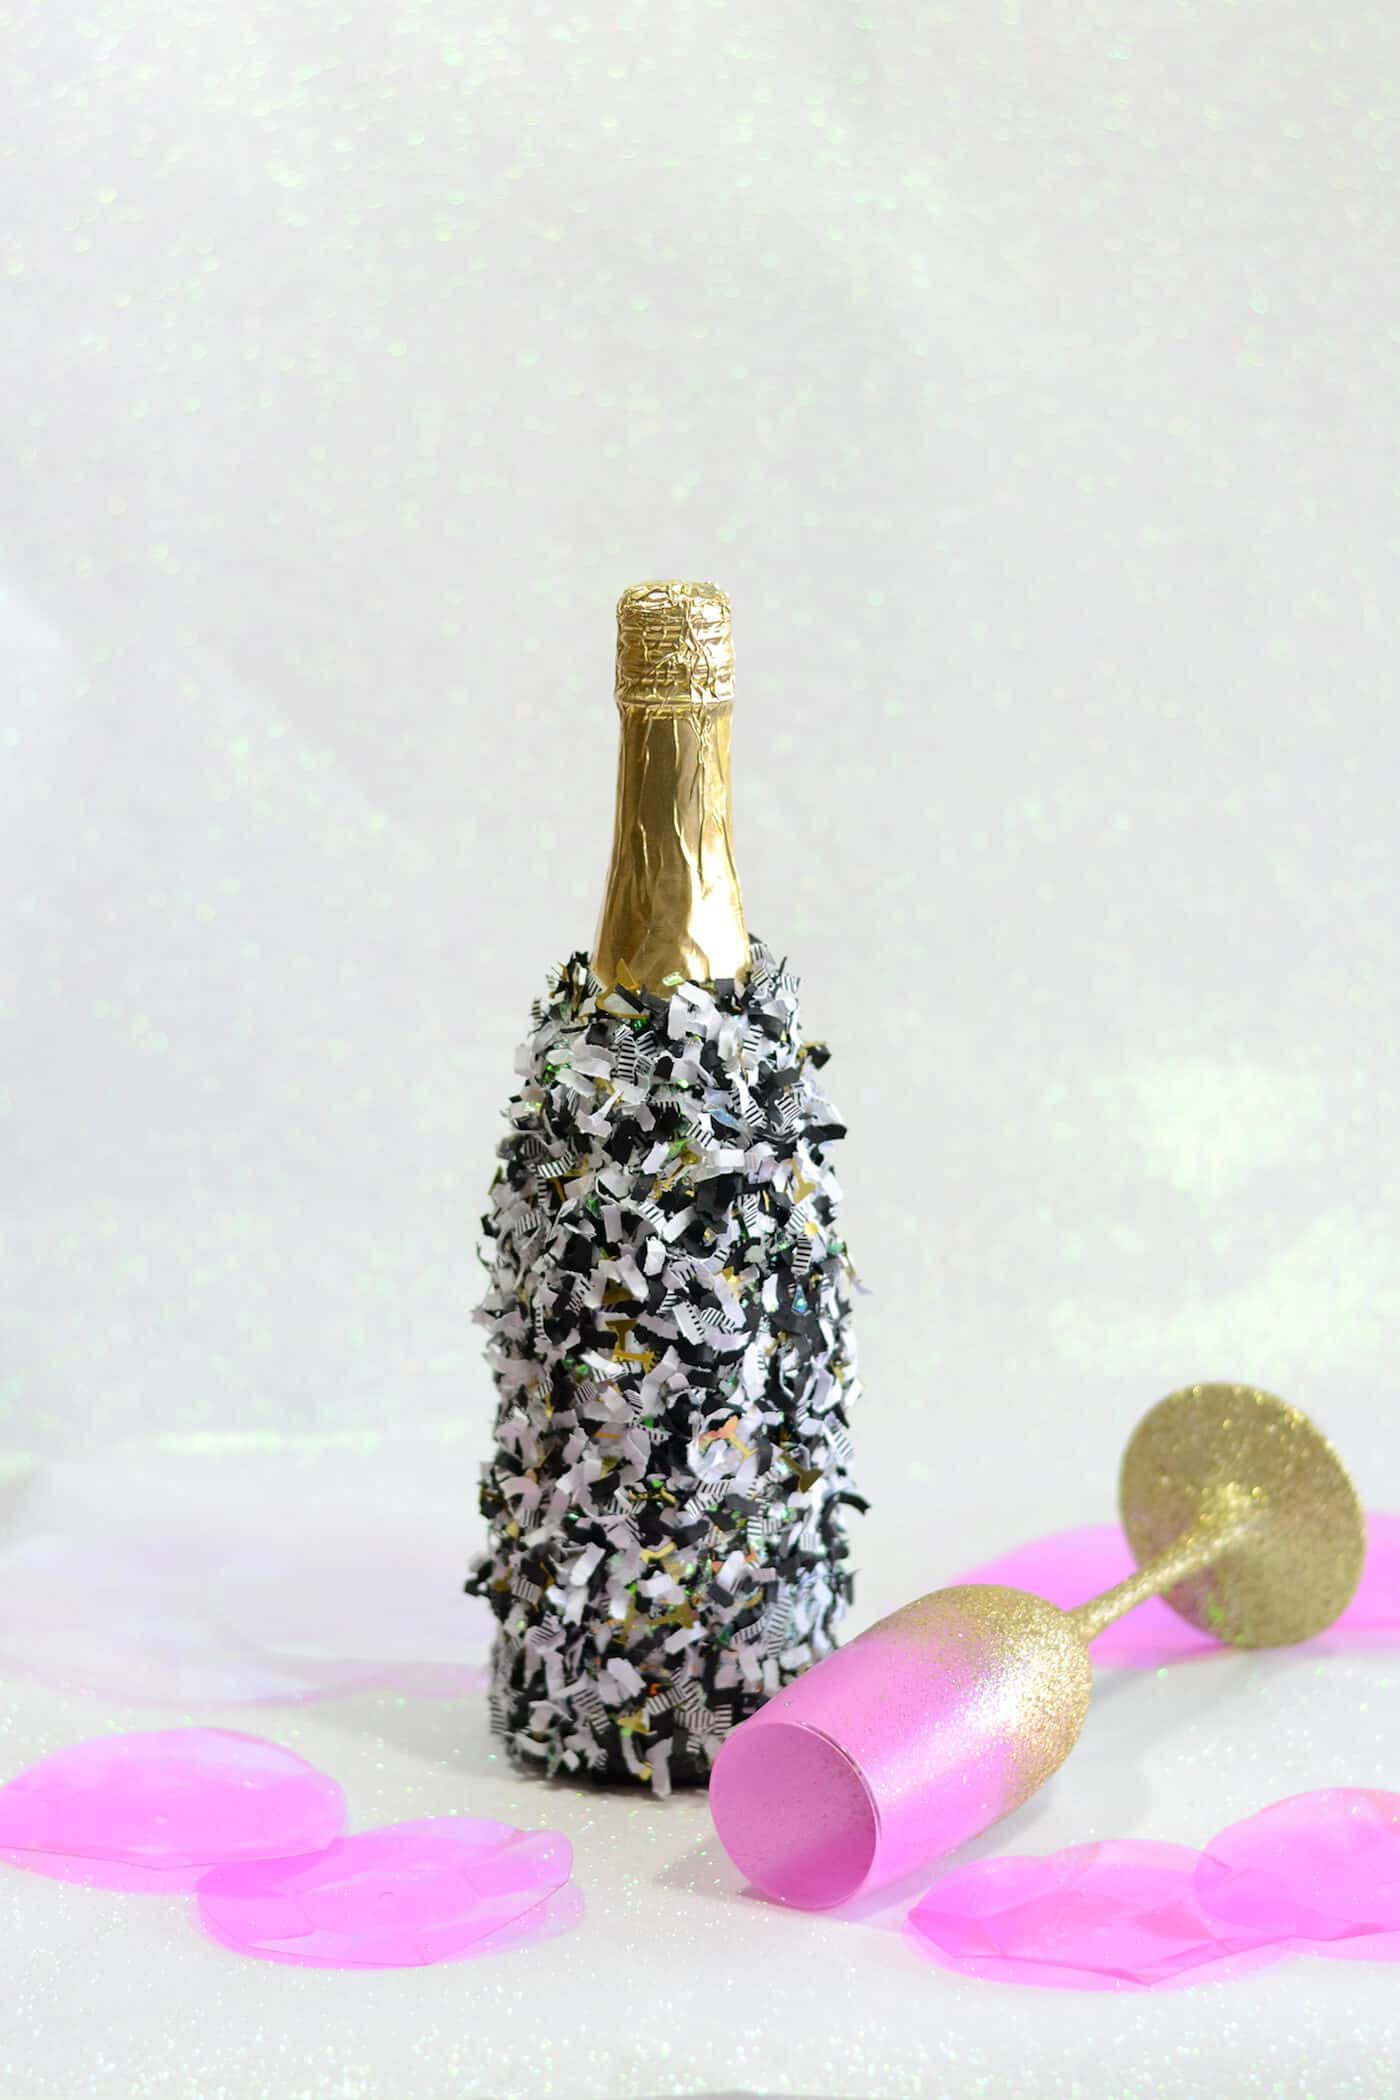 Champagne bottle decoration with confetti